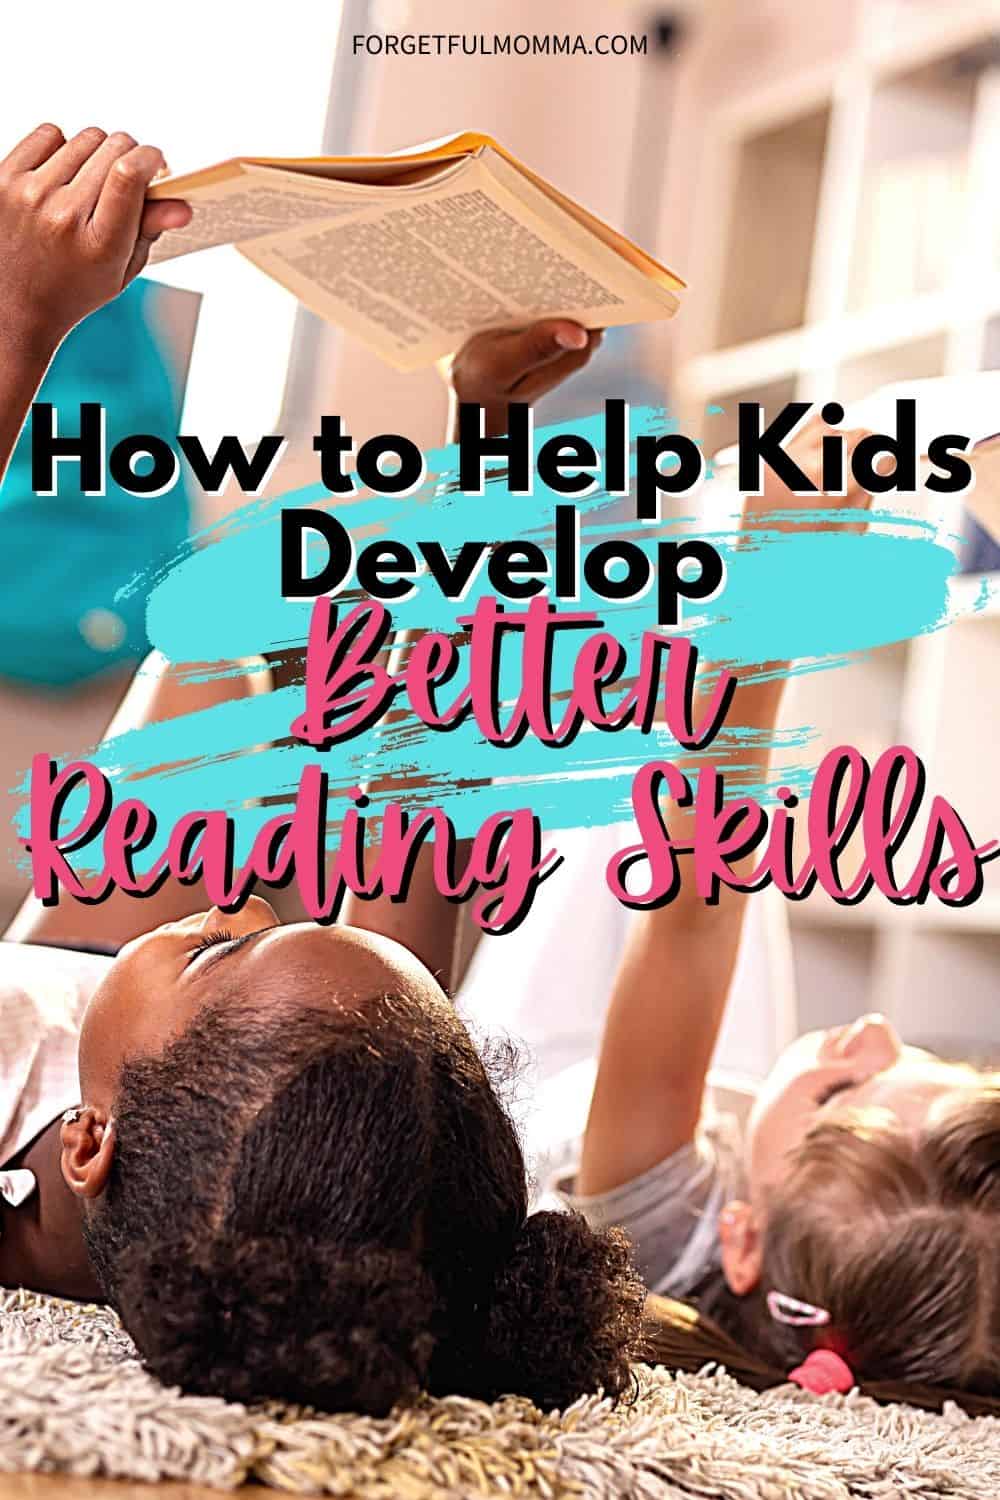 How to Help Kids Develop Better Reading Skills